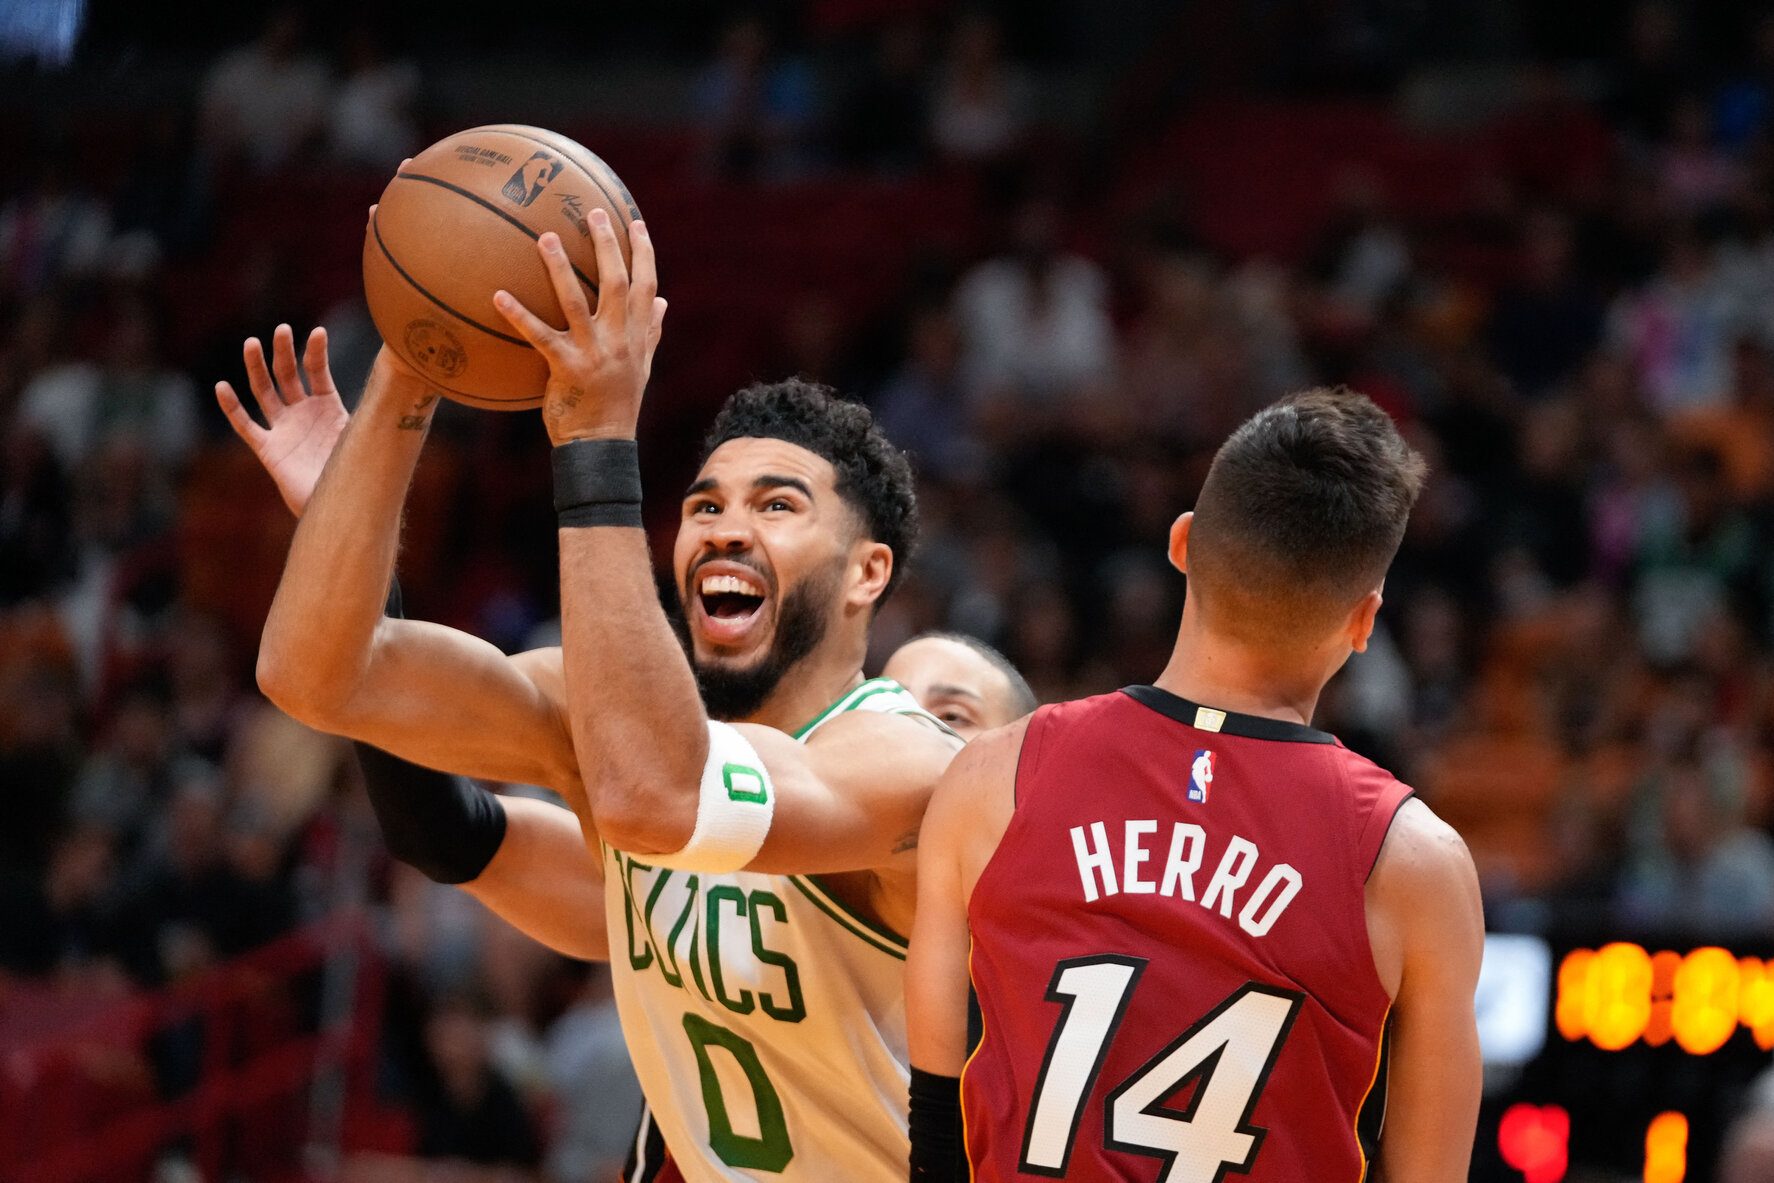 Celtics backcourt carries load in solid win over Heat